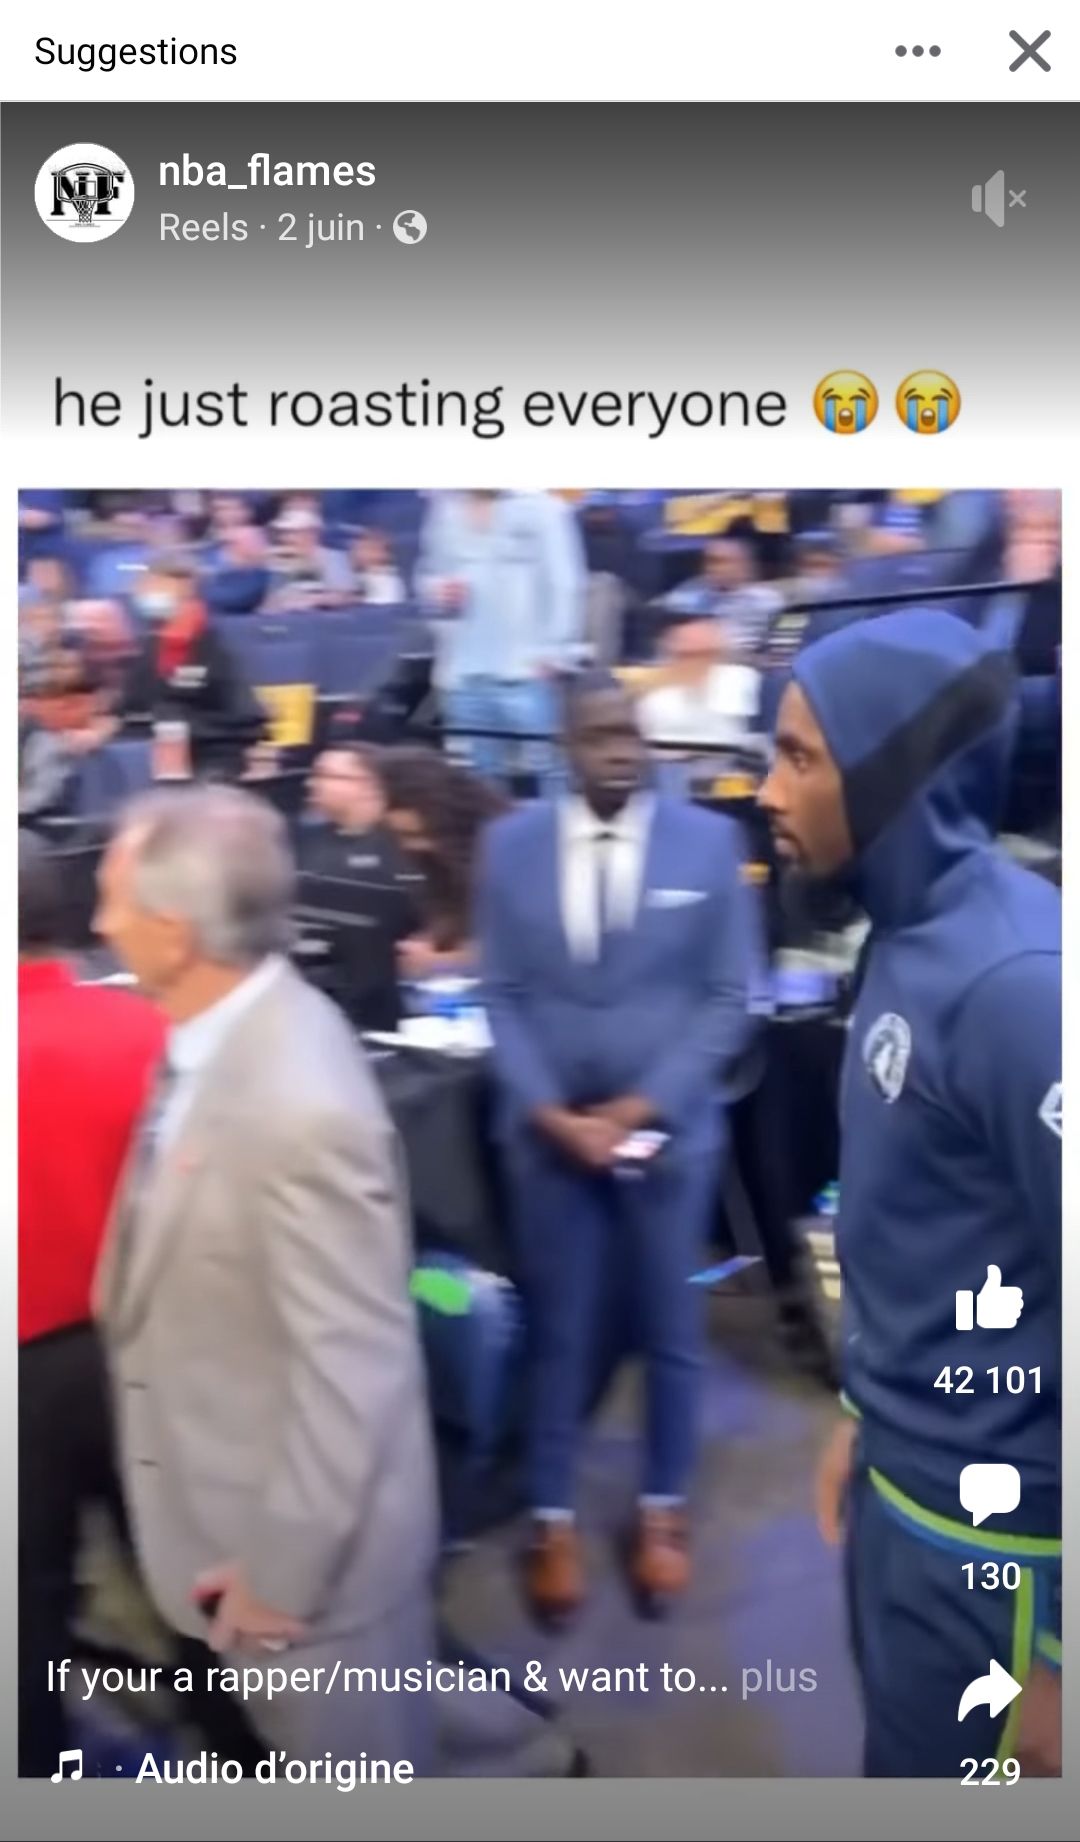 A NBA player roasting everyone according to the clickbait title